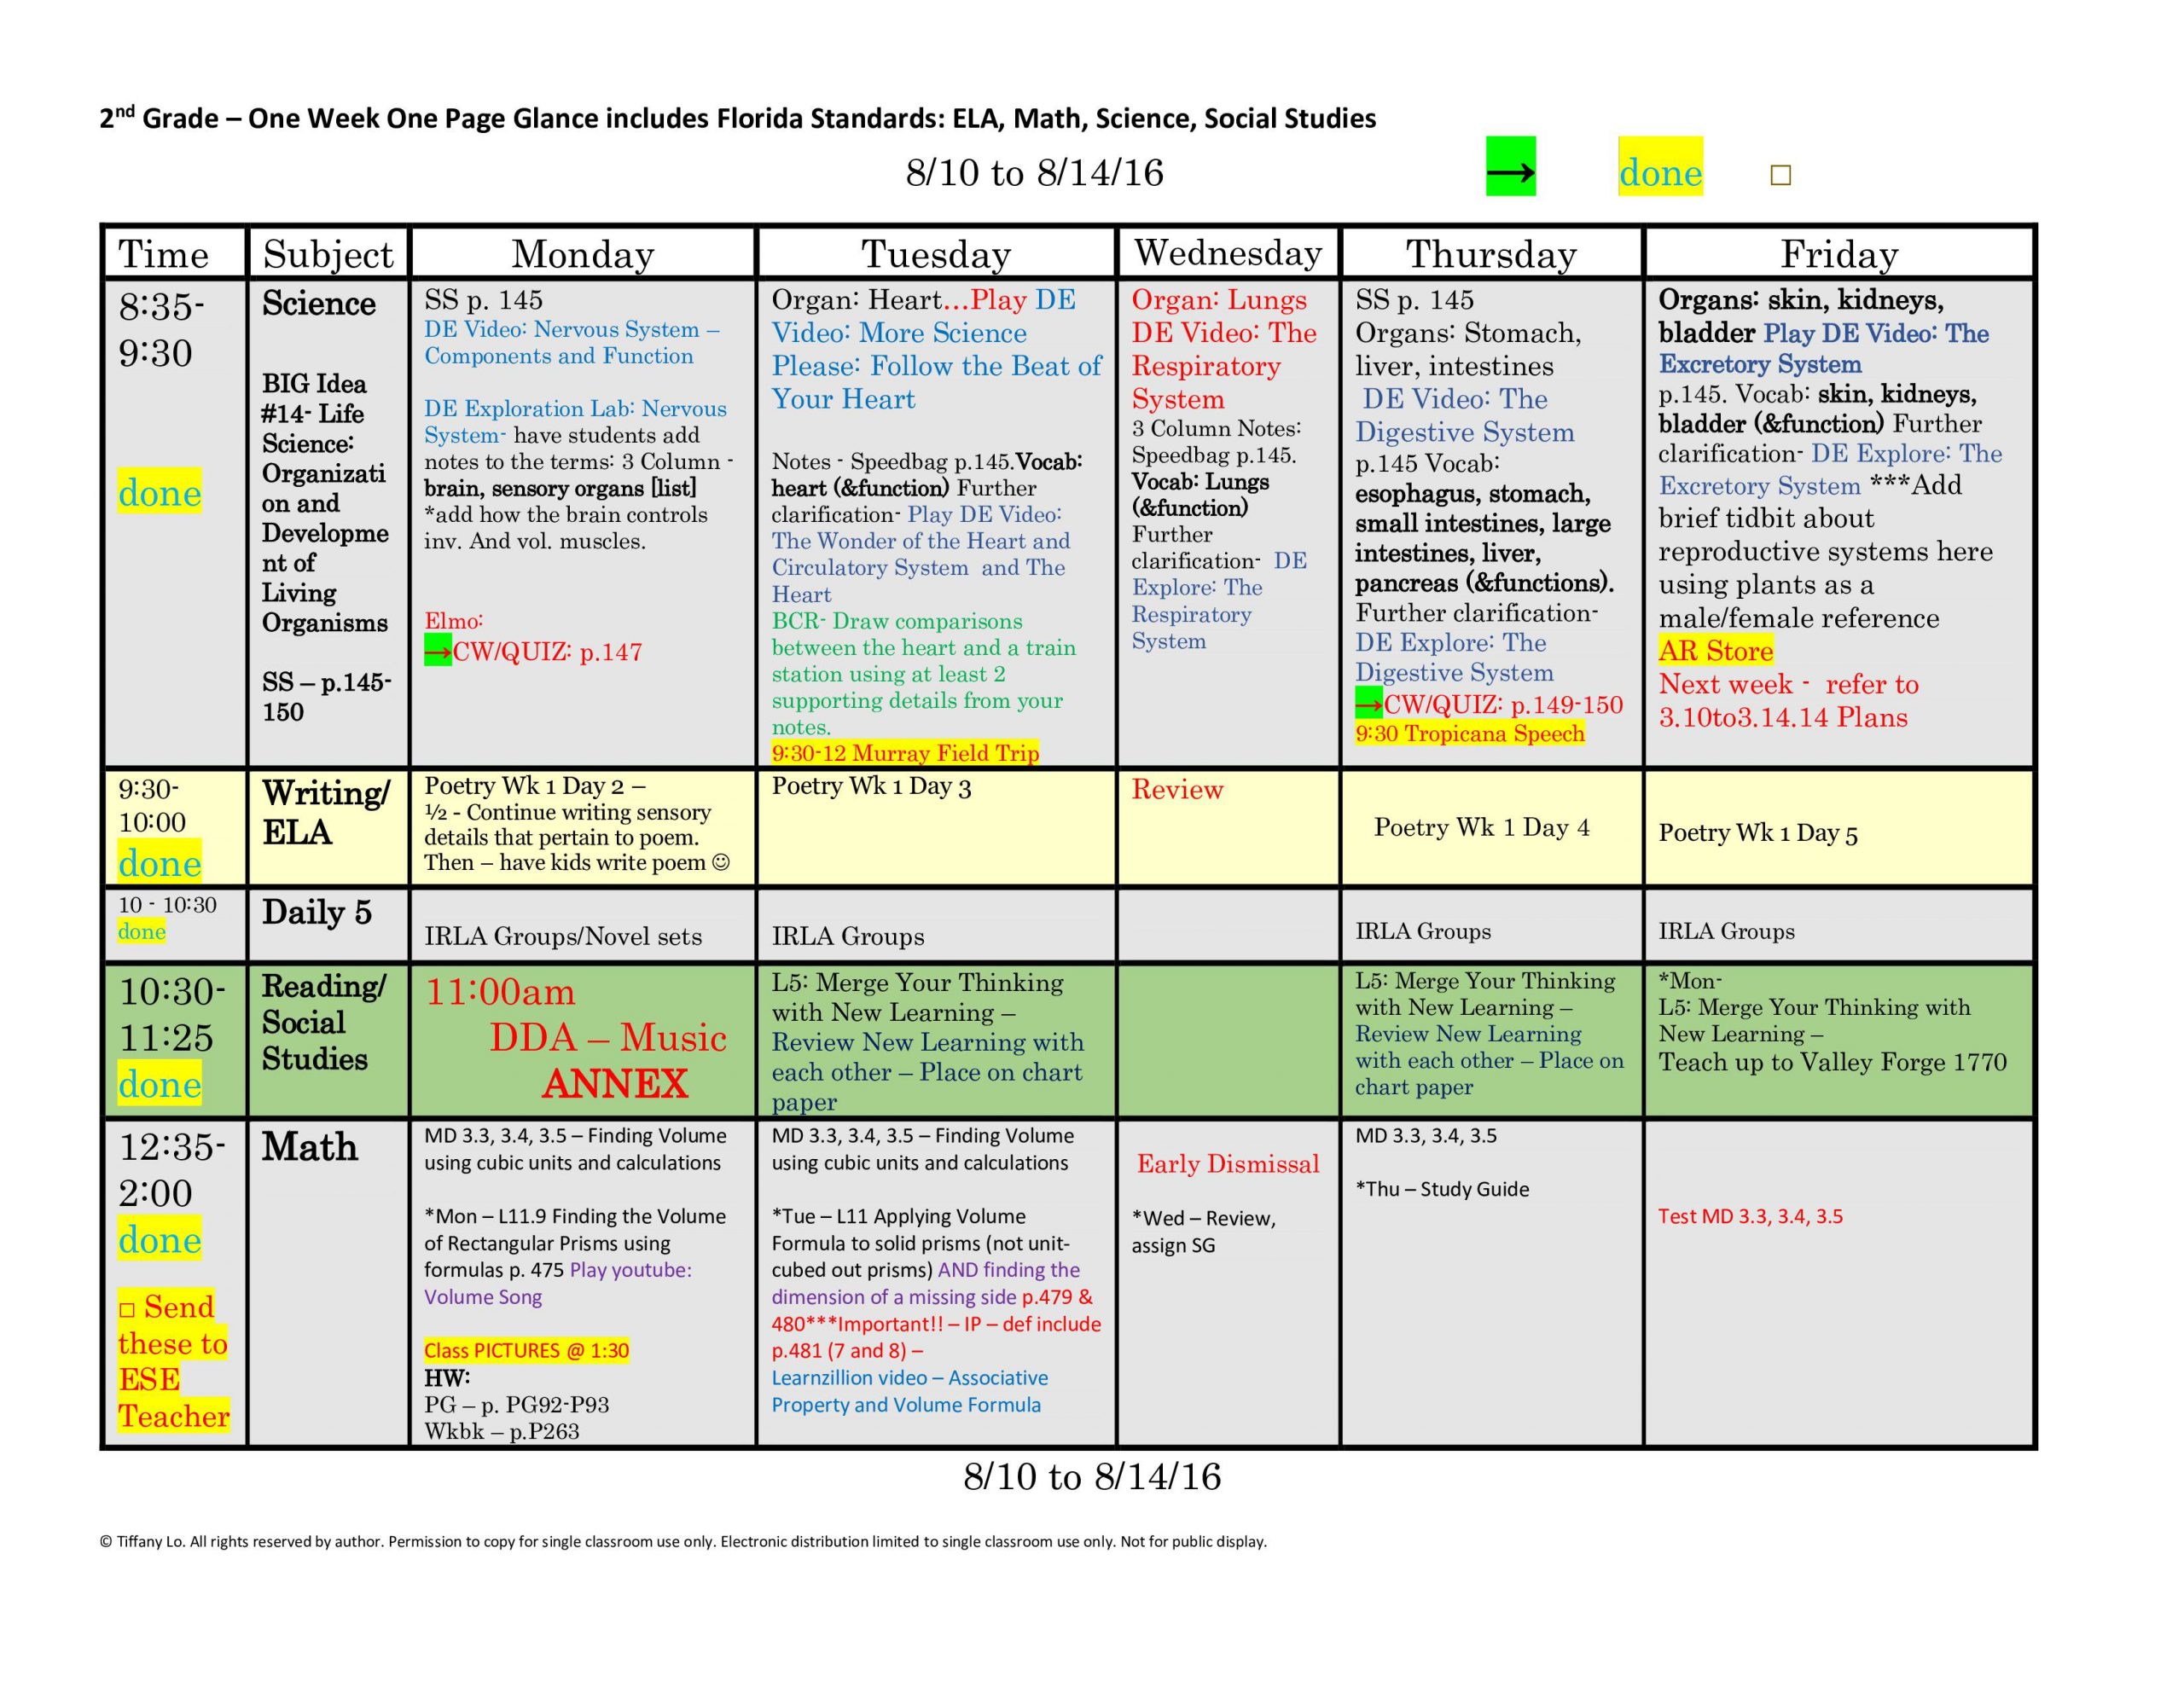 2Nd Second Grade Florida Standards Weekly Lesson Plan Template: 1 Week 1  Glance